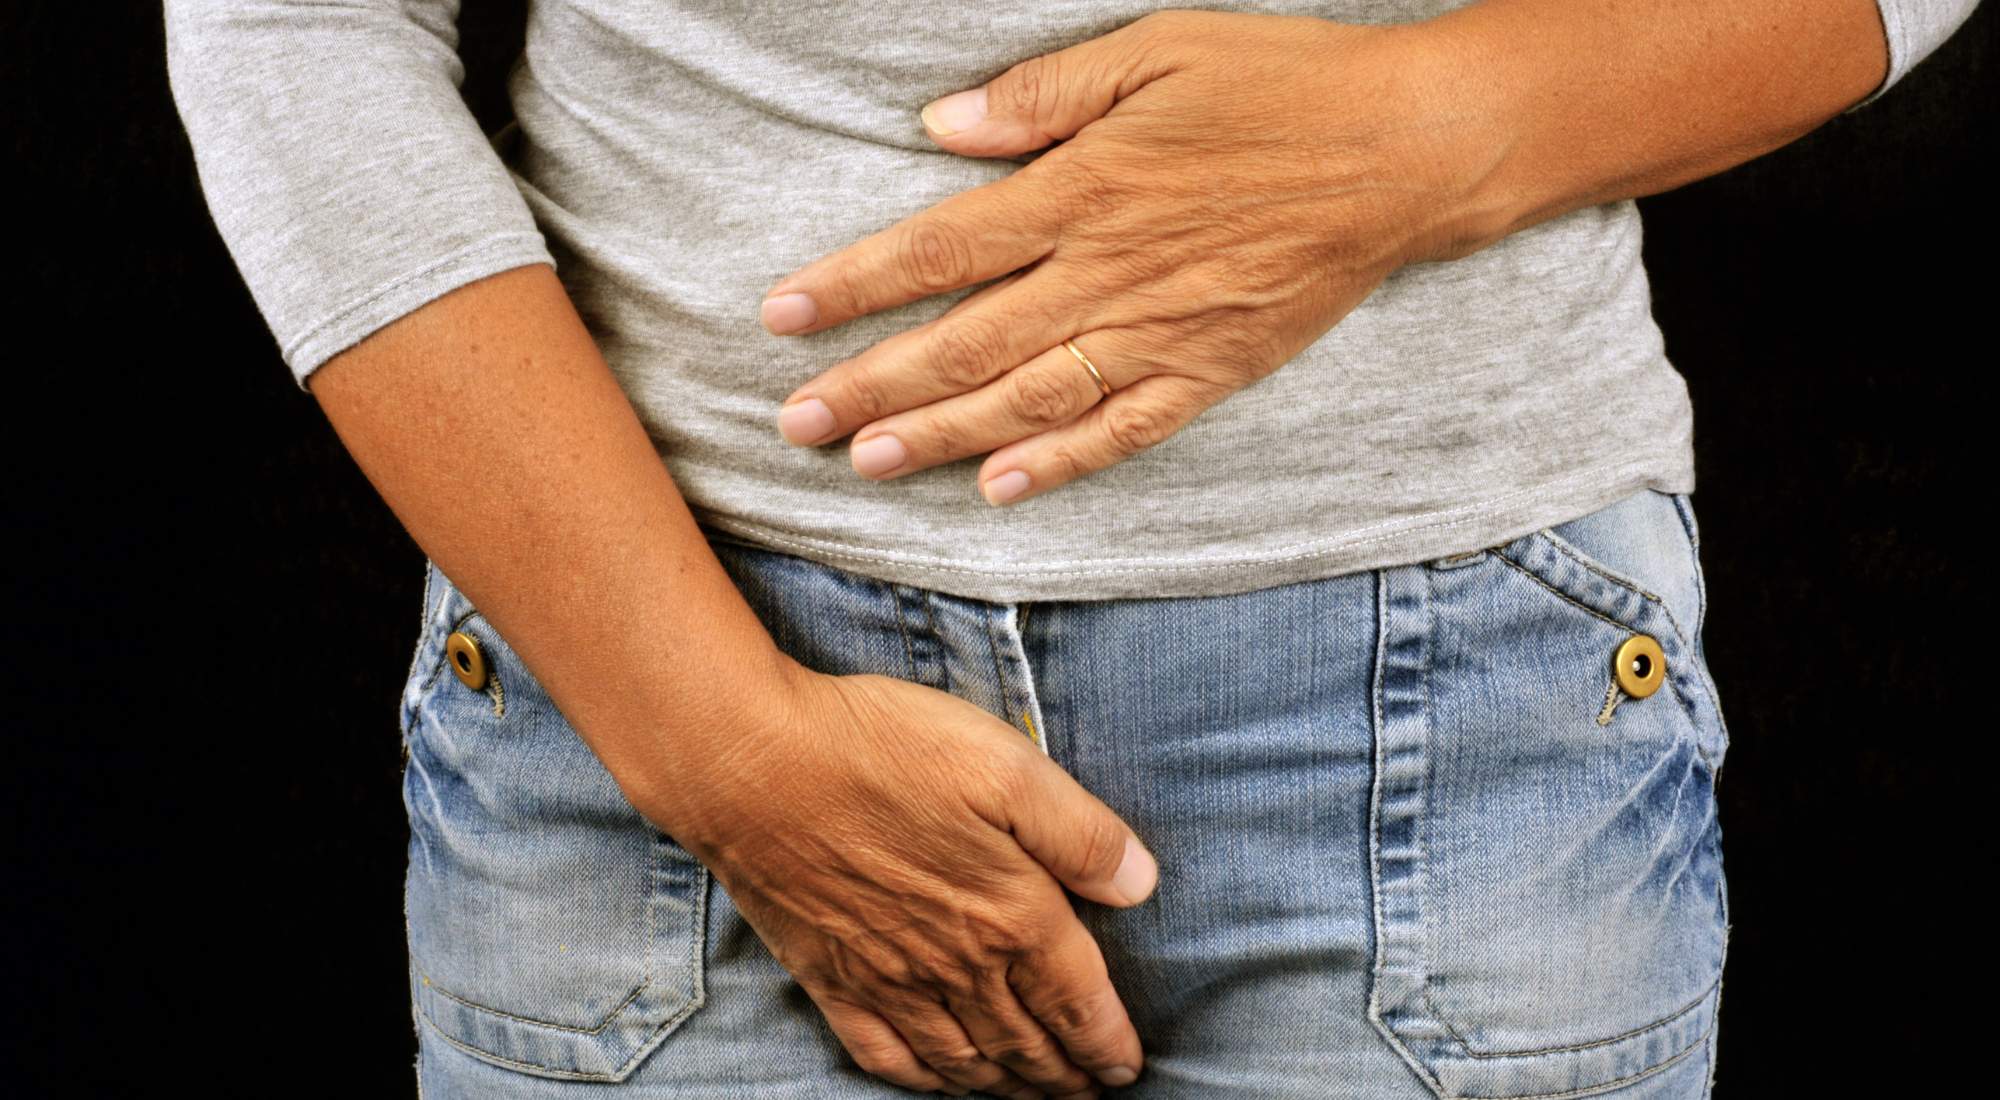 Food and Incontinence: Is There a Connection?